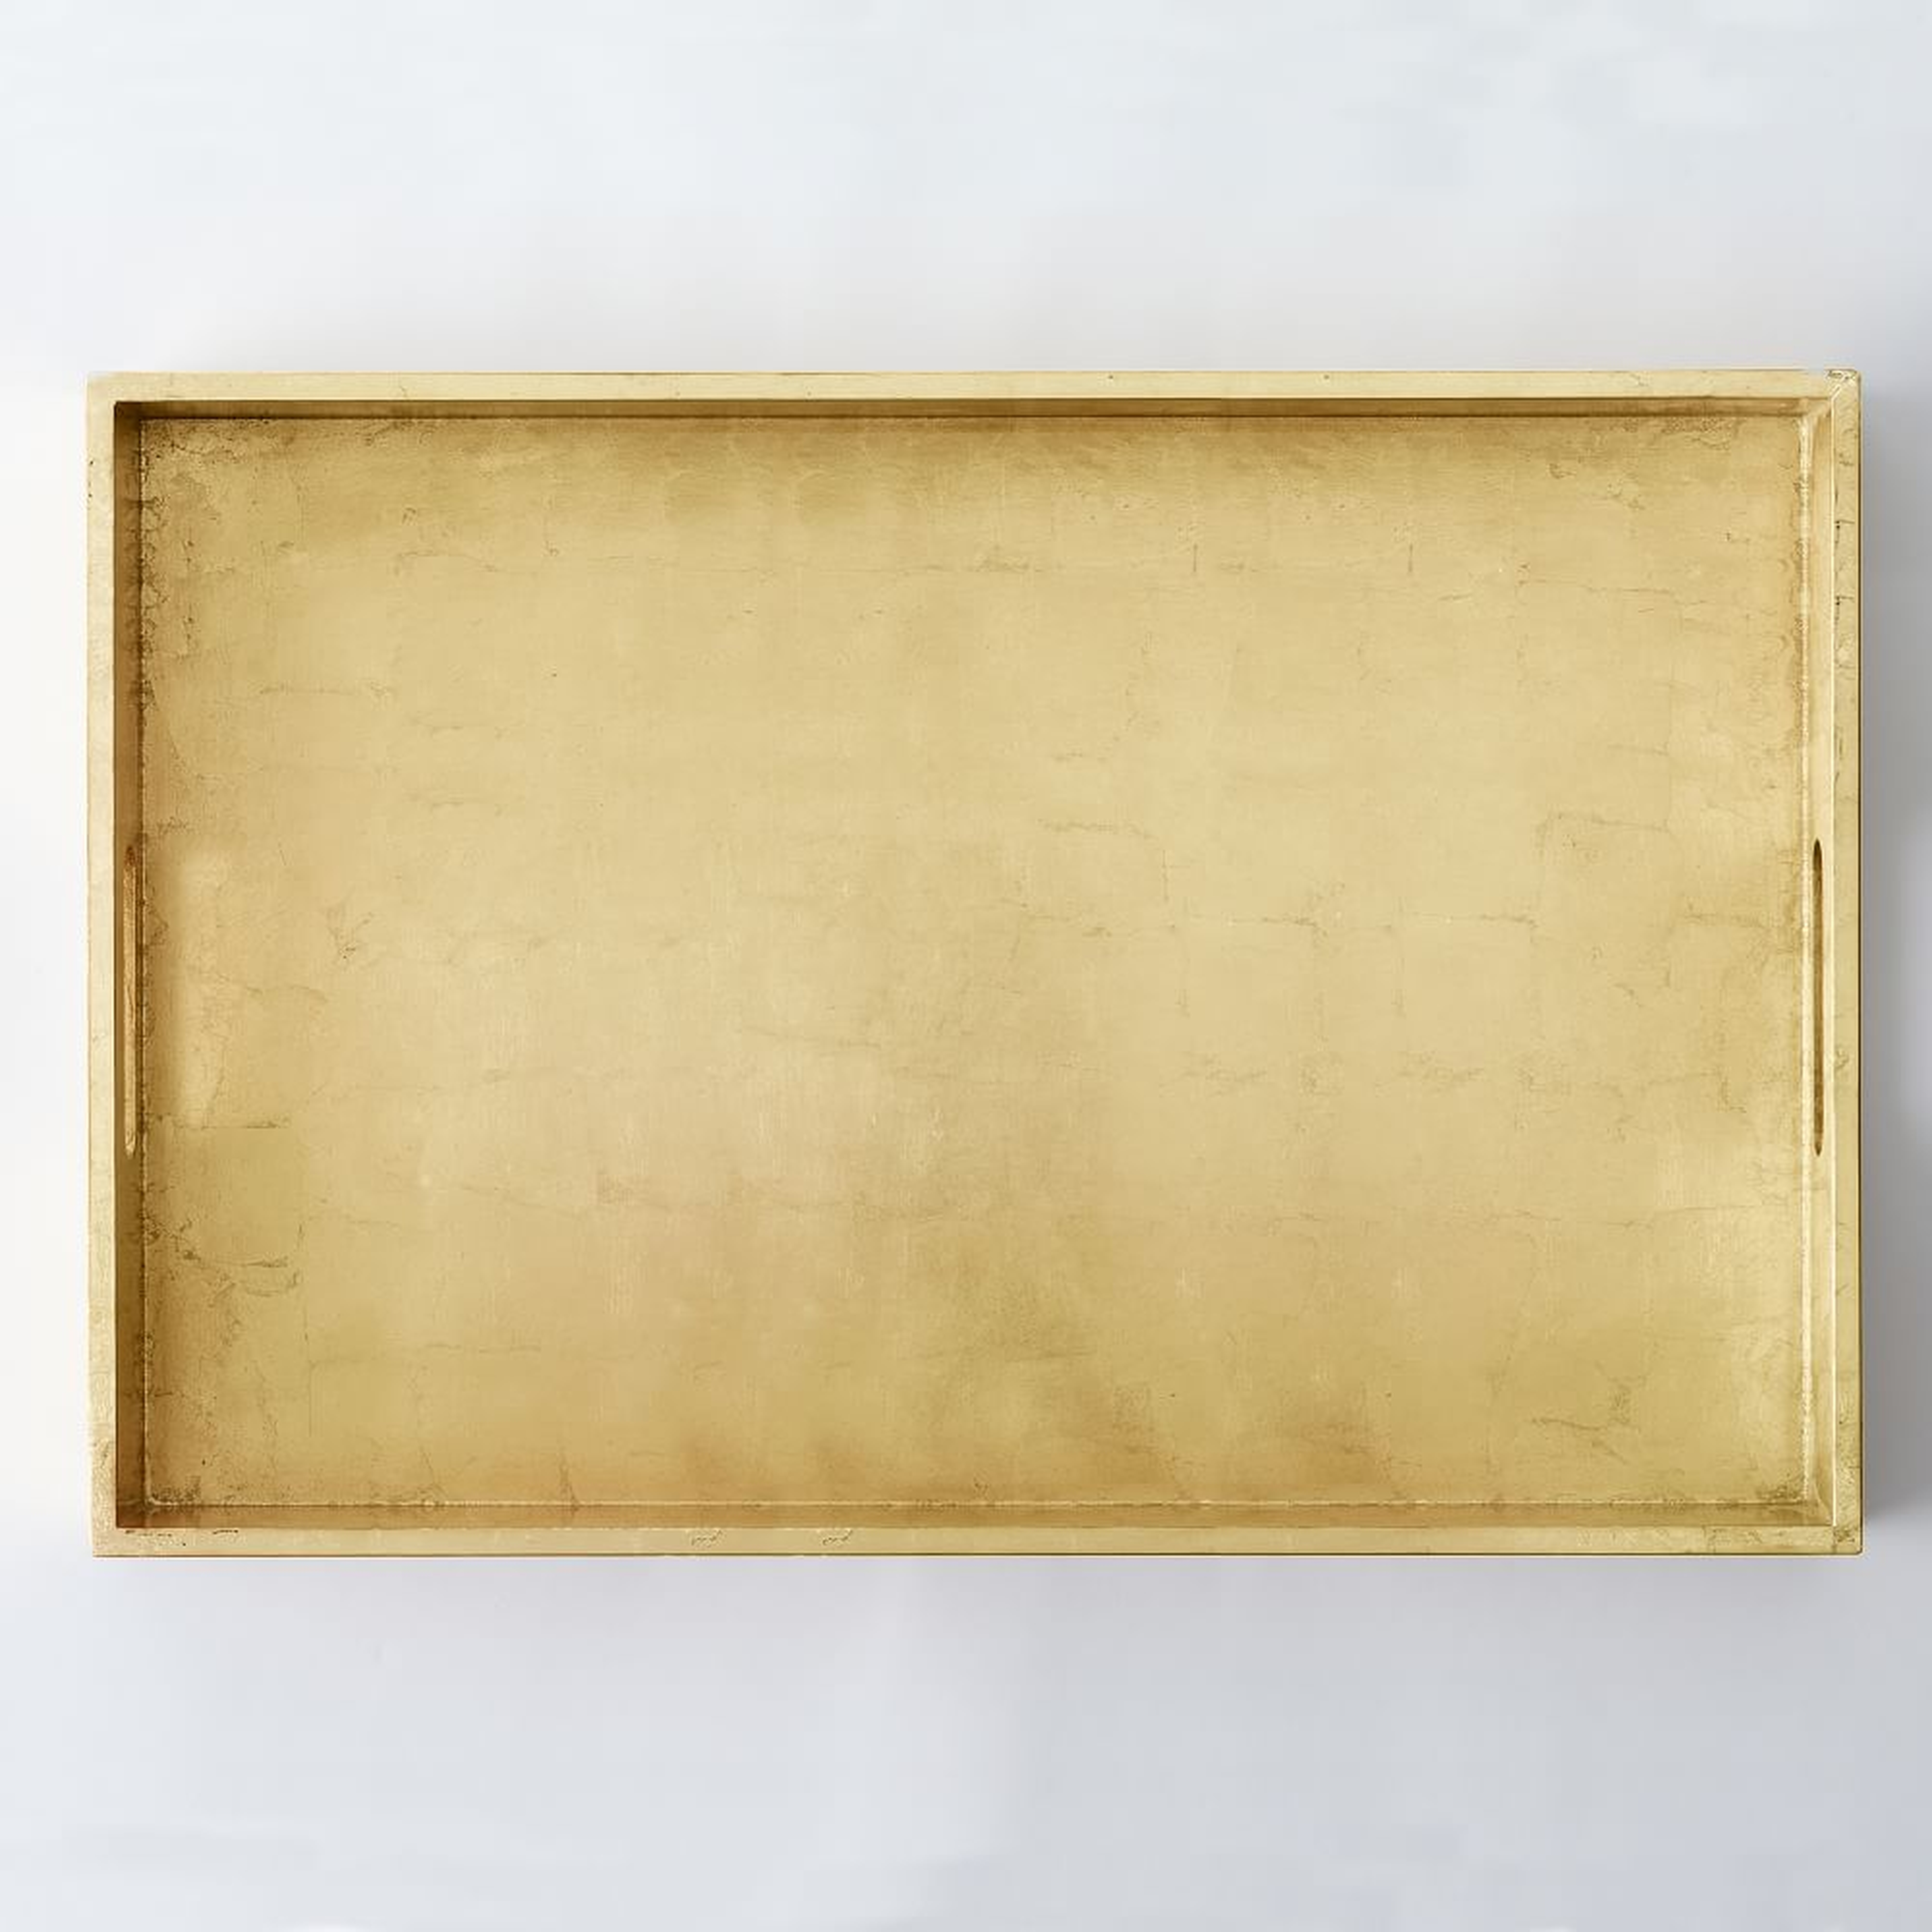 Reclaimed Wood Lacquer Tray, 18"x 28", Gold - West Elm